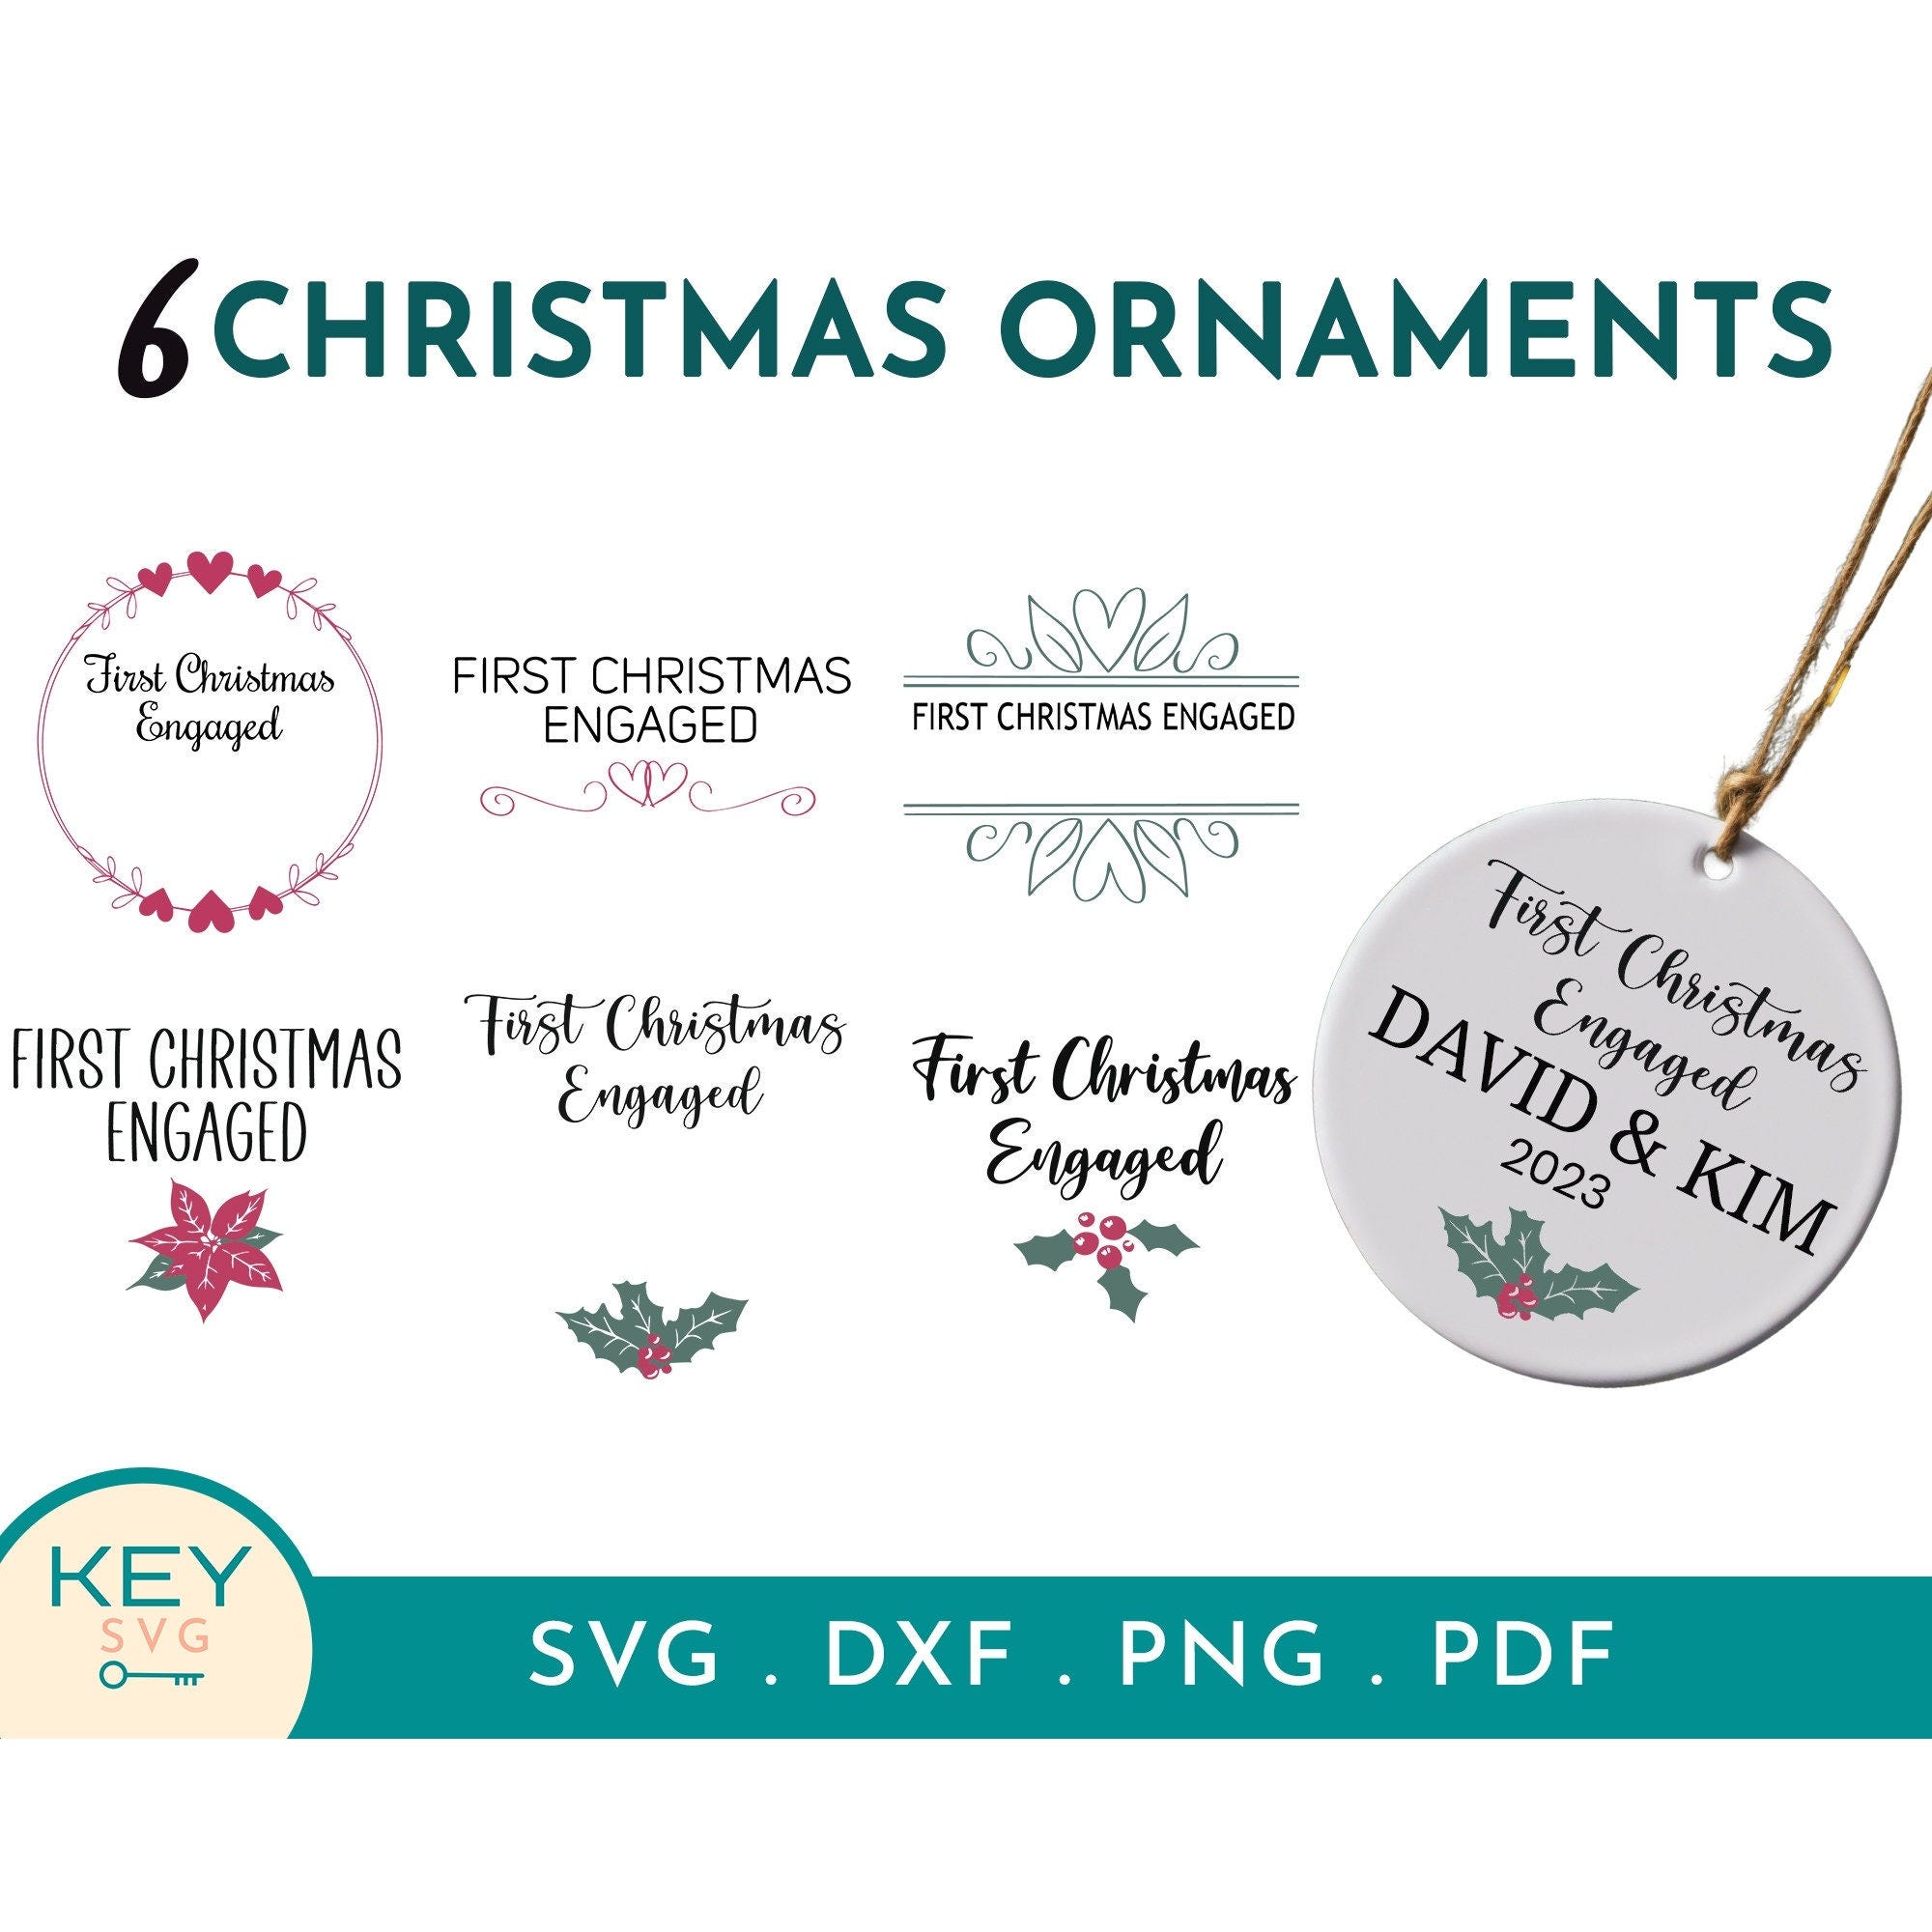 First Christmas Engaged Ornament Personalized Png, Our First Christmas Ornament Engaged Png, Flower Ornament Template, Couples Ornament